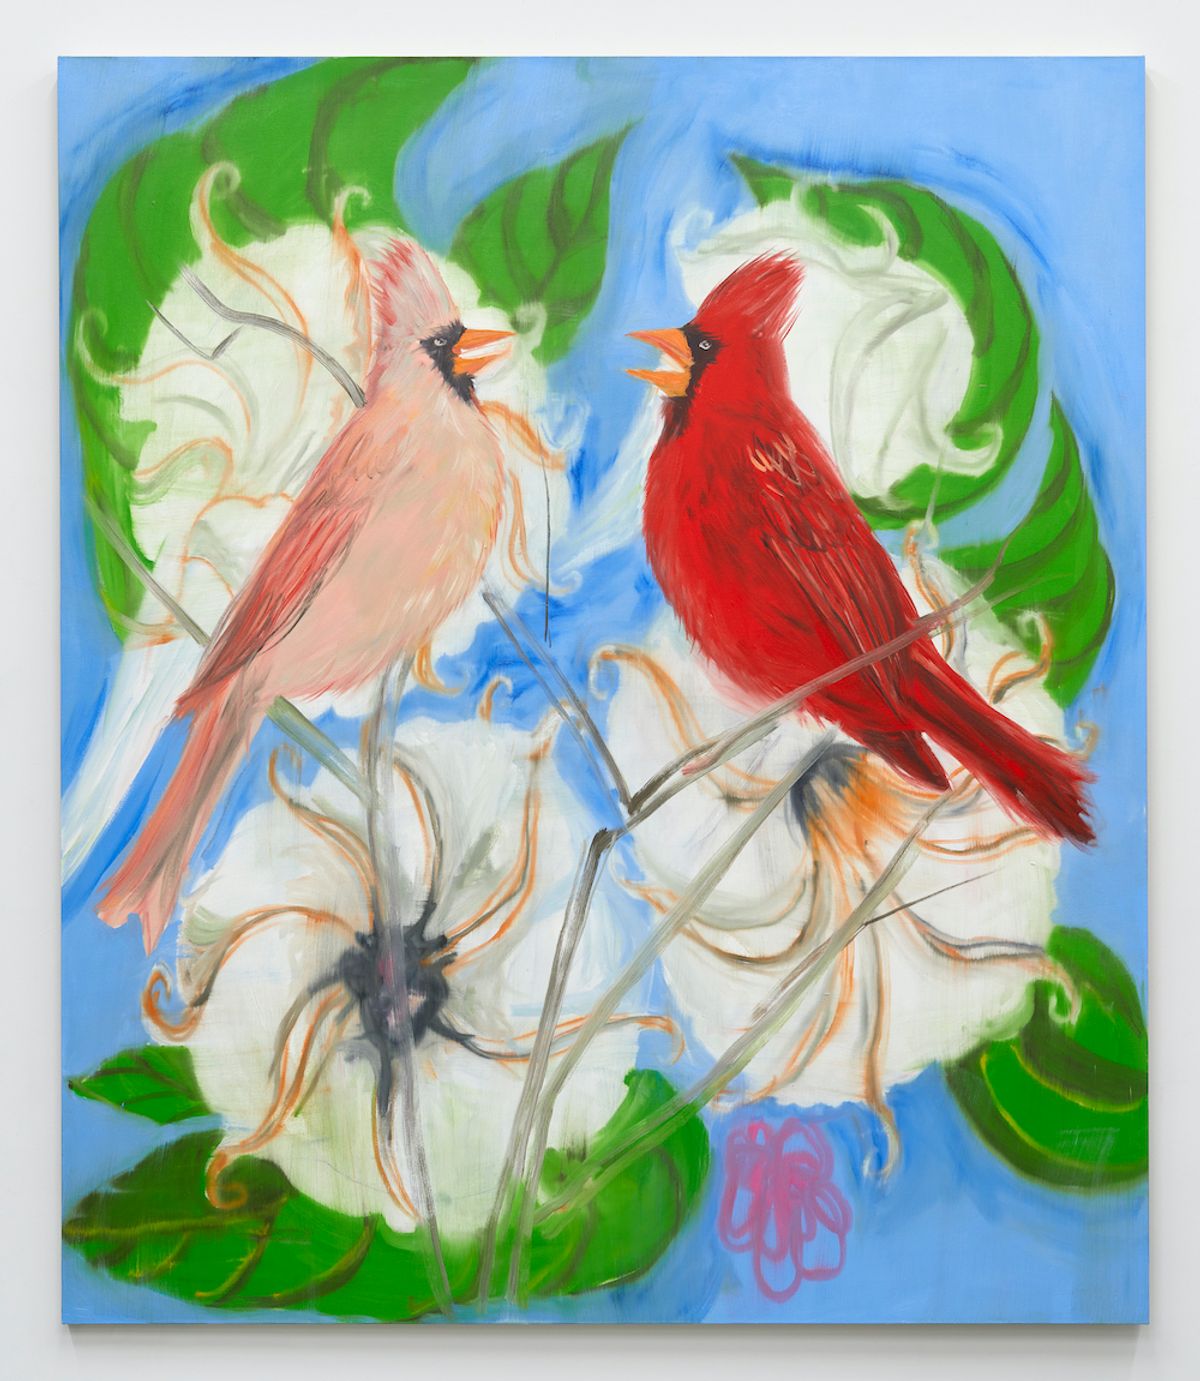 Ann Craven, Portrait of Two Cardinals (after Picabia) (2021) Karma